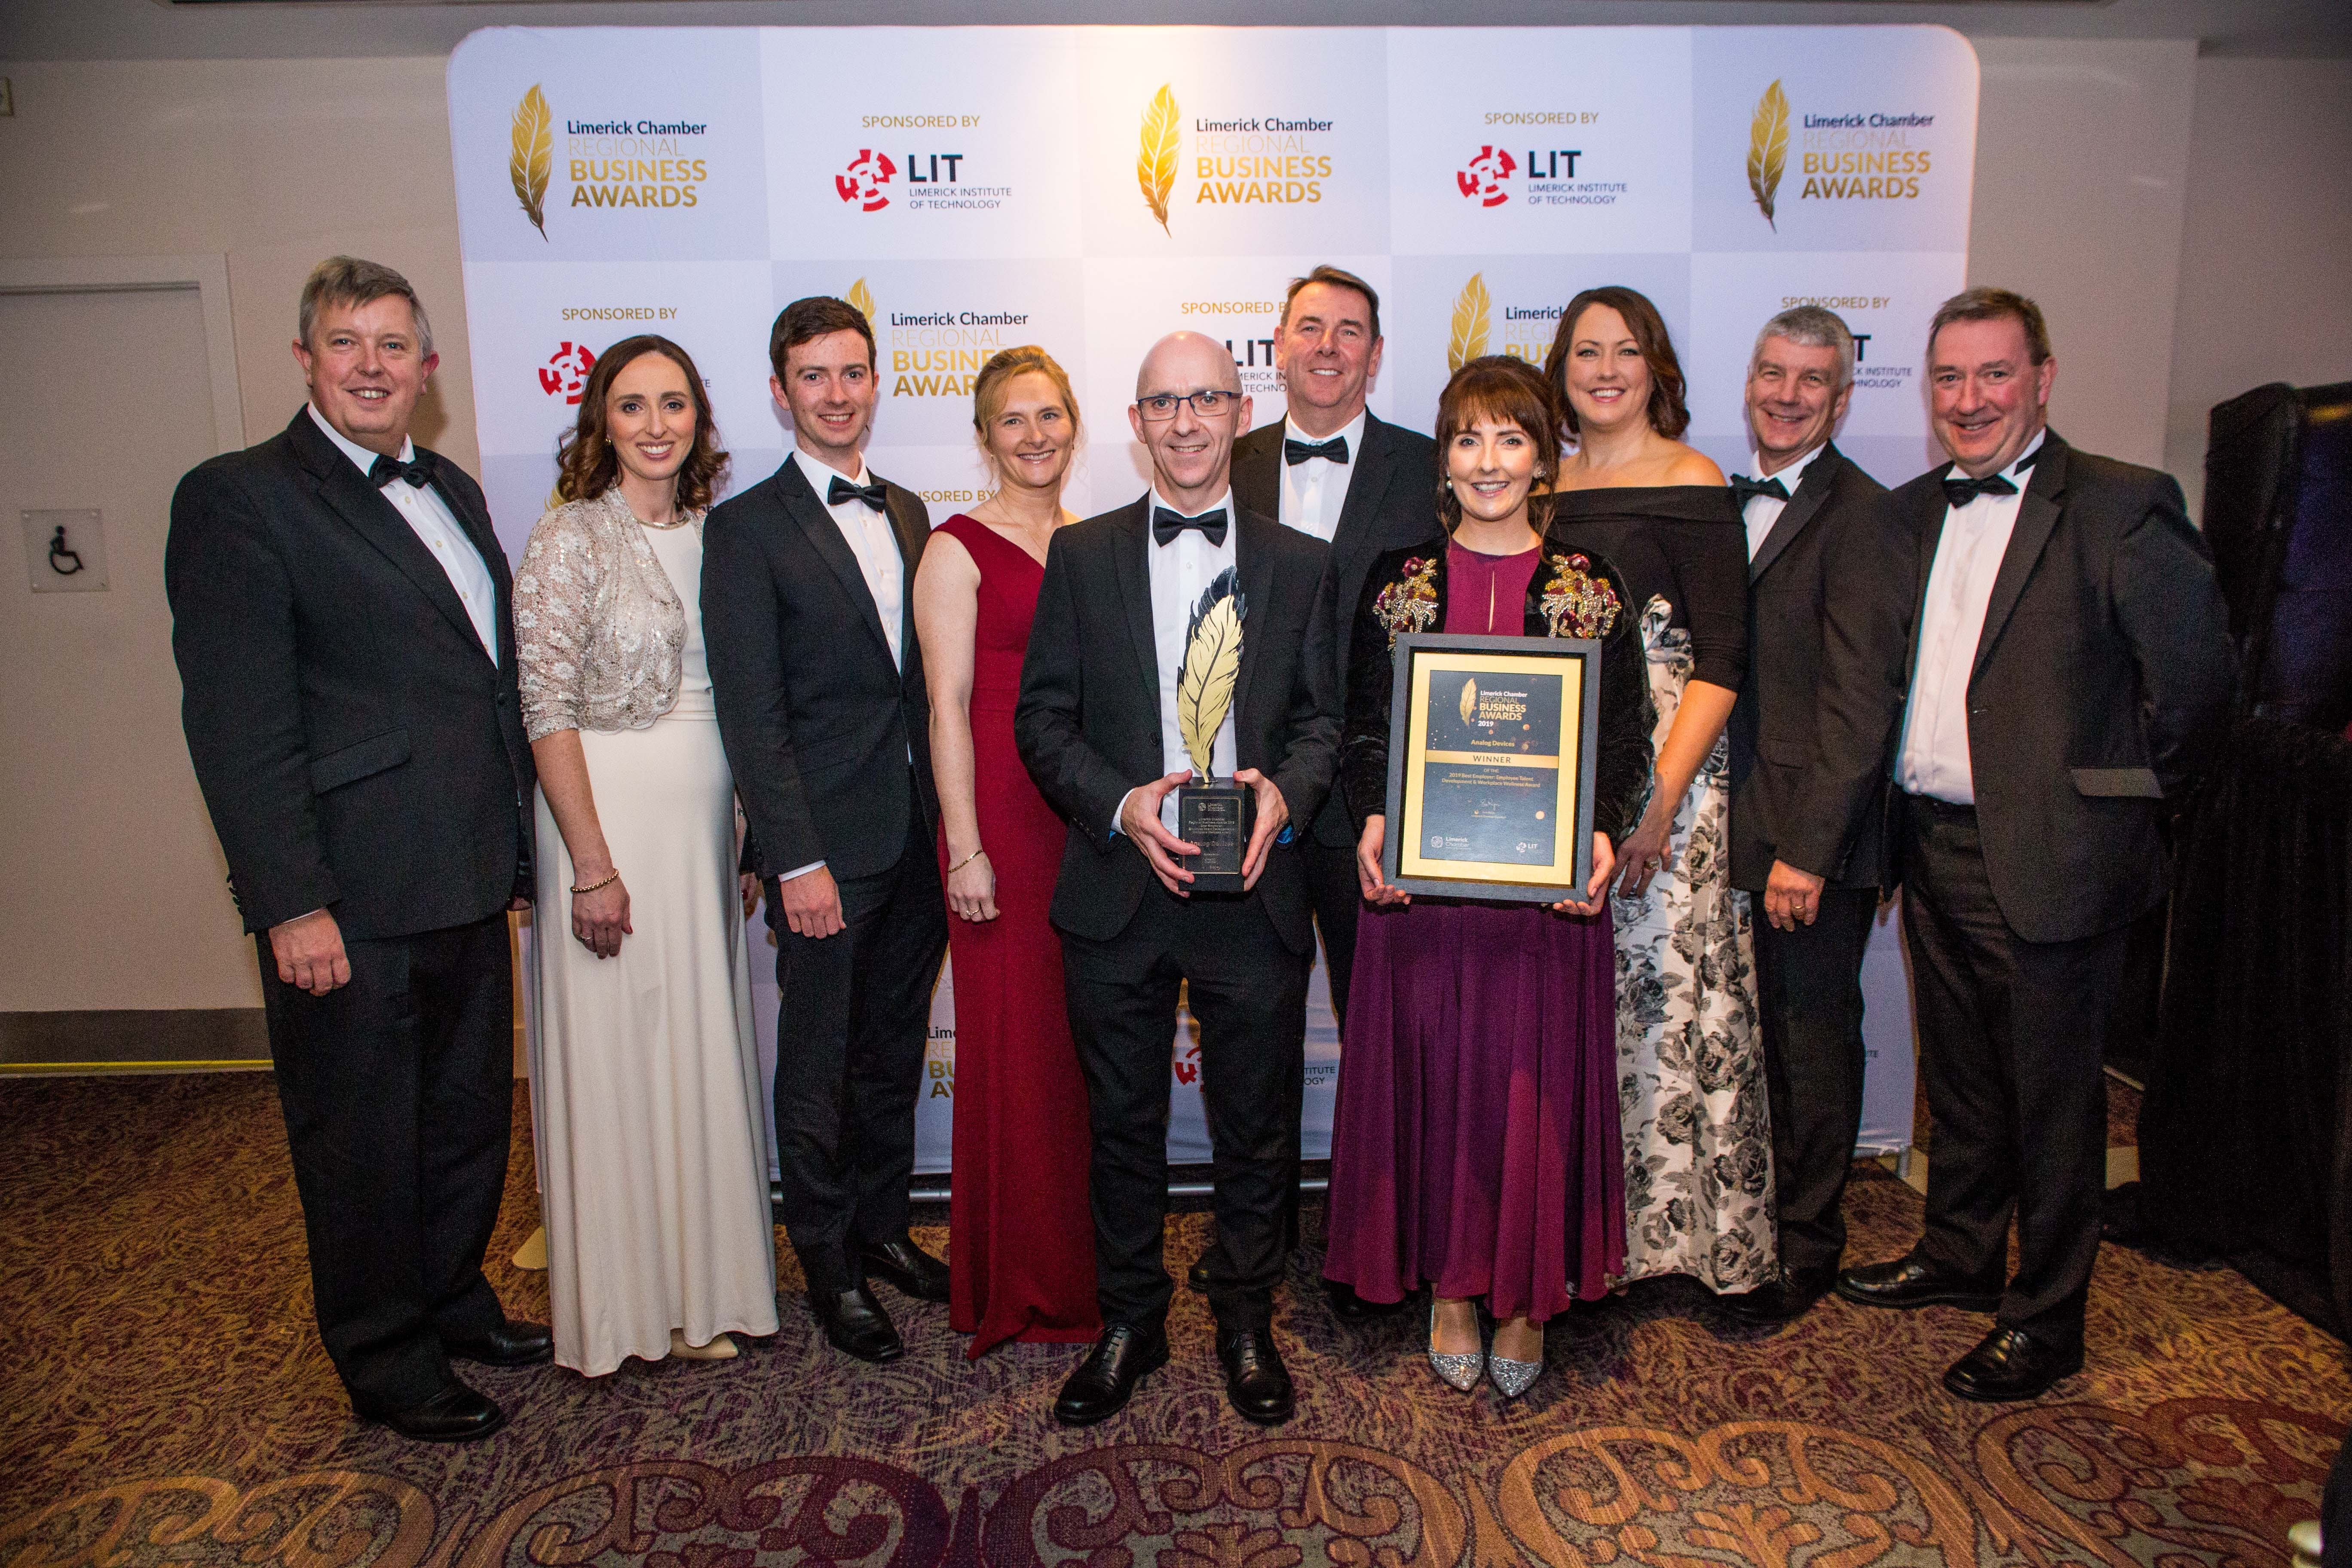 The Analog Devices team pictured with their award for Best Employer: Employee Talent Development and Workplace Wellness at the Limerick Chamber President's Dinner. Photo: Cian Reinhardt